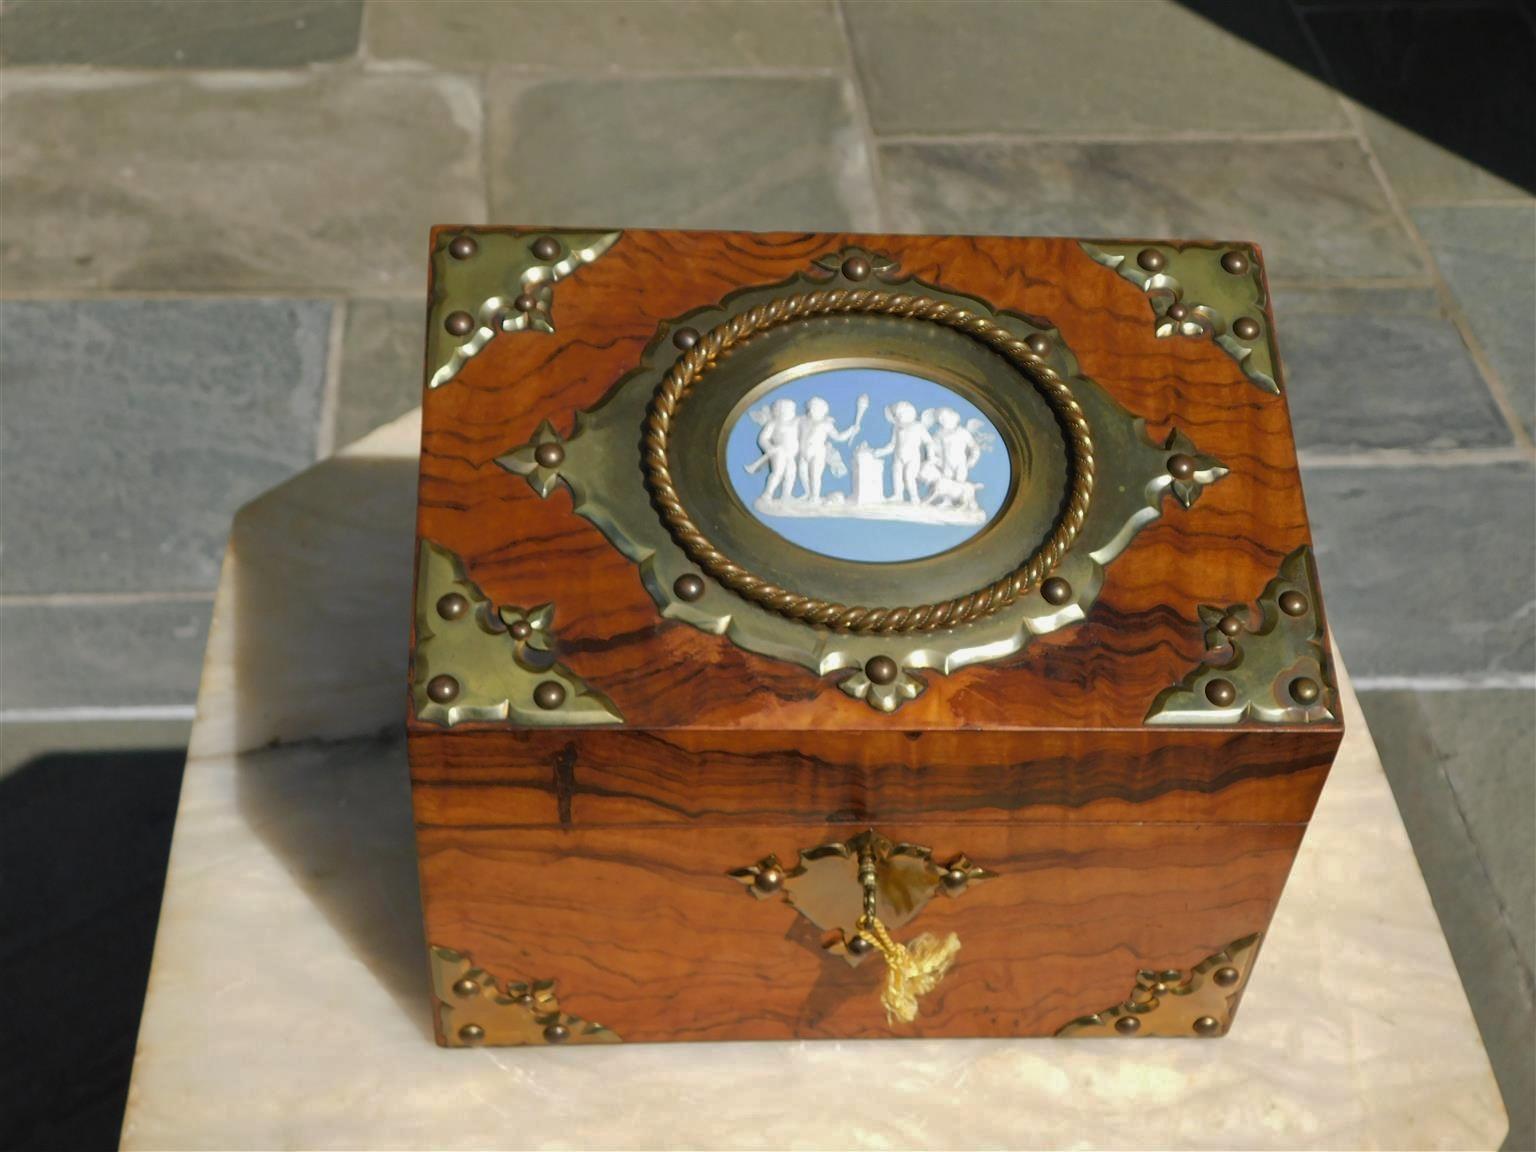 Hand-Carved English Burl Walnut & Figural Cherub Wedgewood Letter Box with Mounts, C. 1850 For Sale